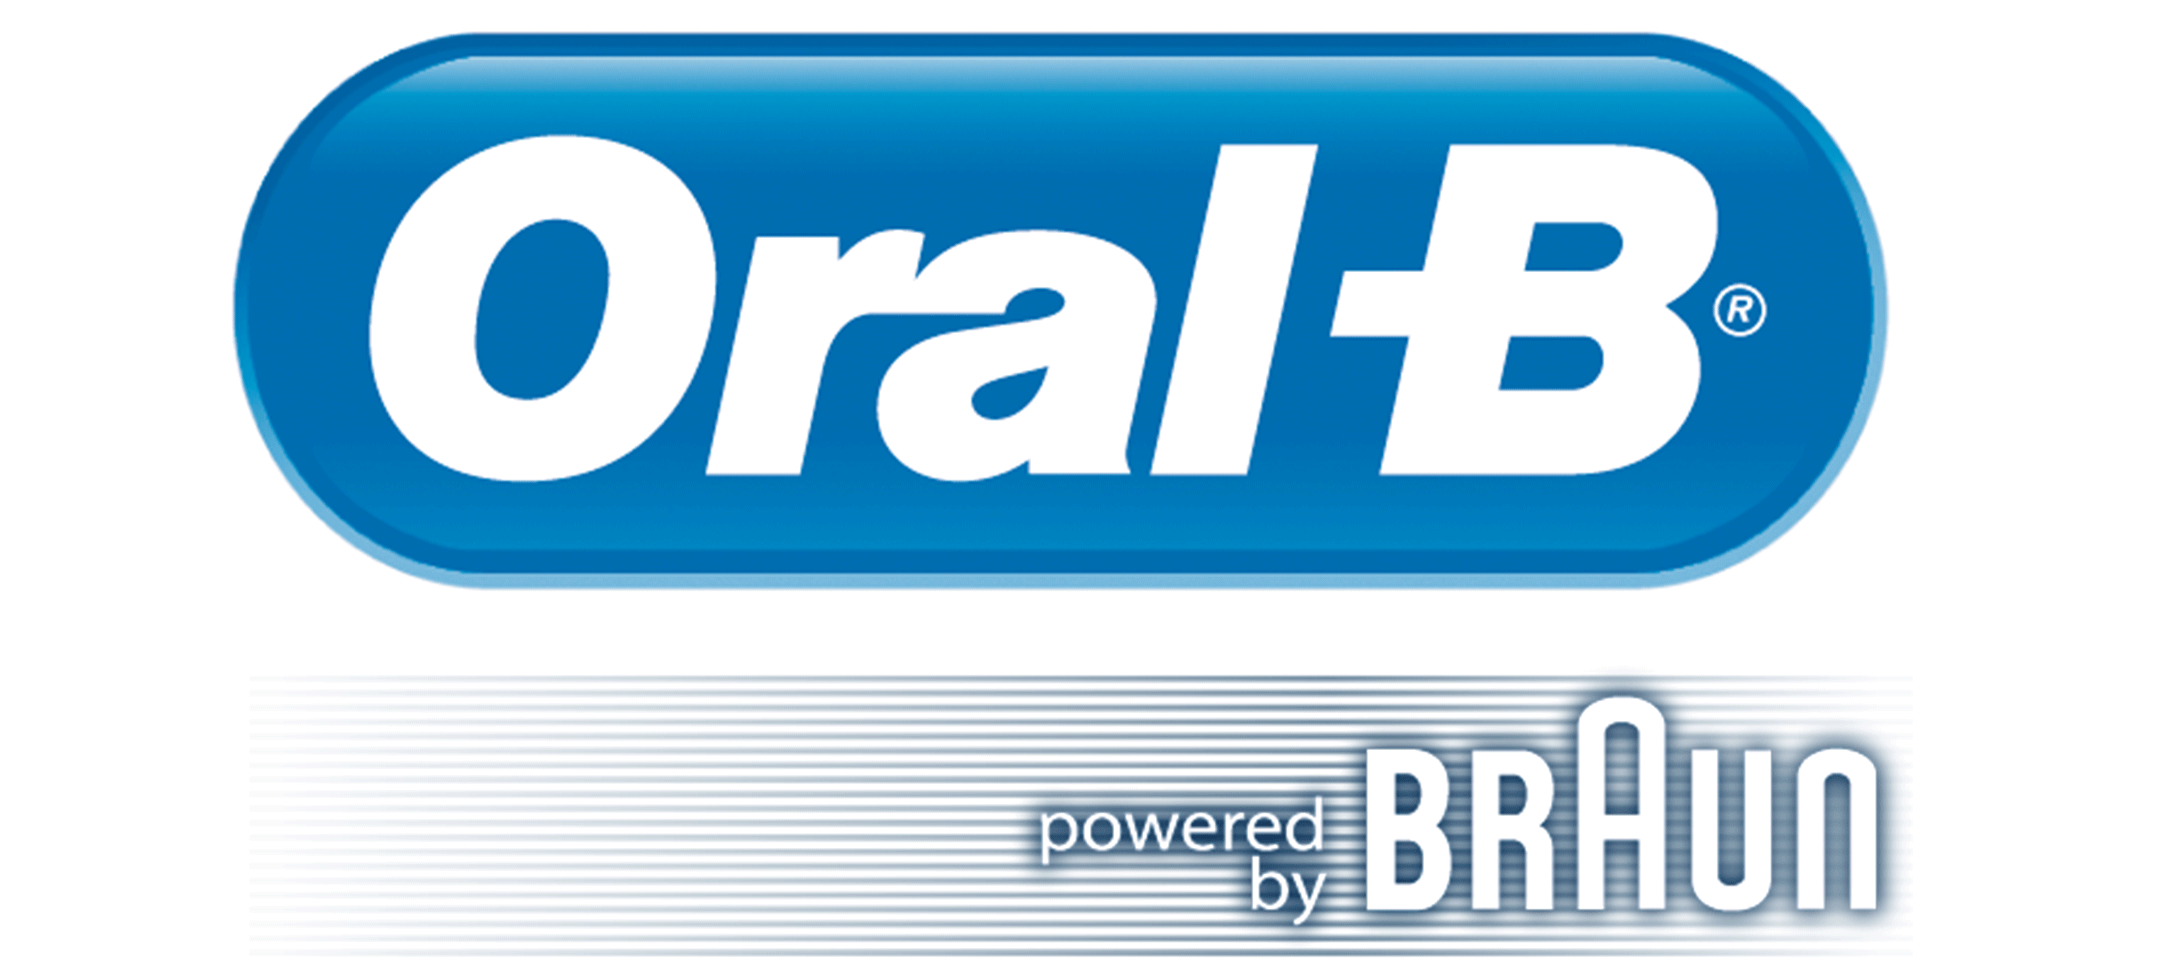 Oral-B Logo - Oral B DB4010 Battery Operated Toothbrush